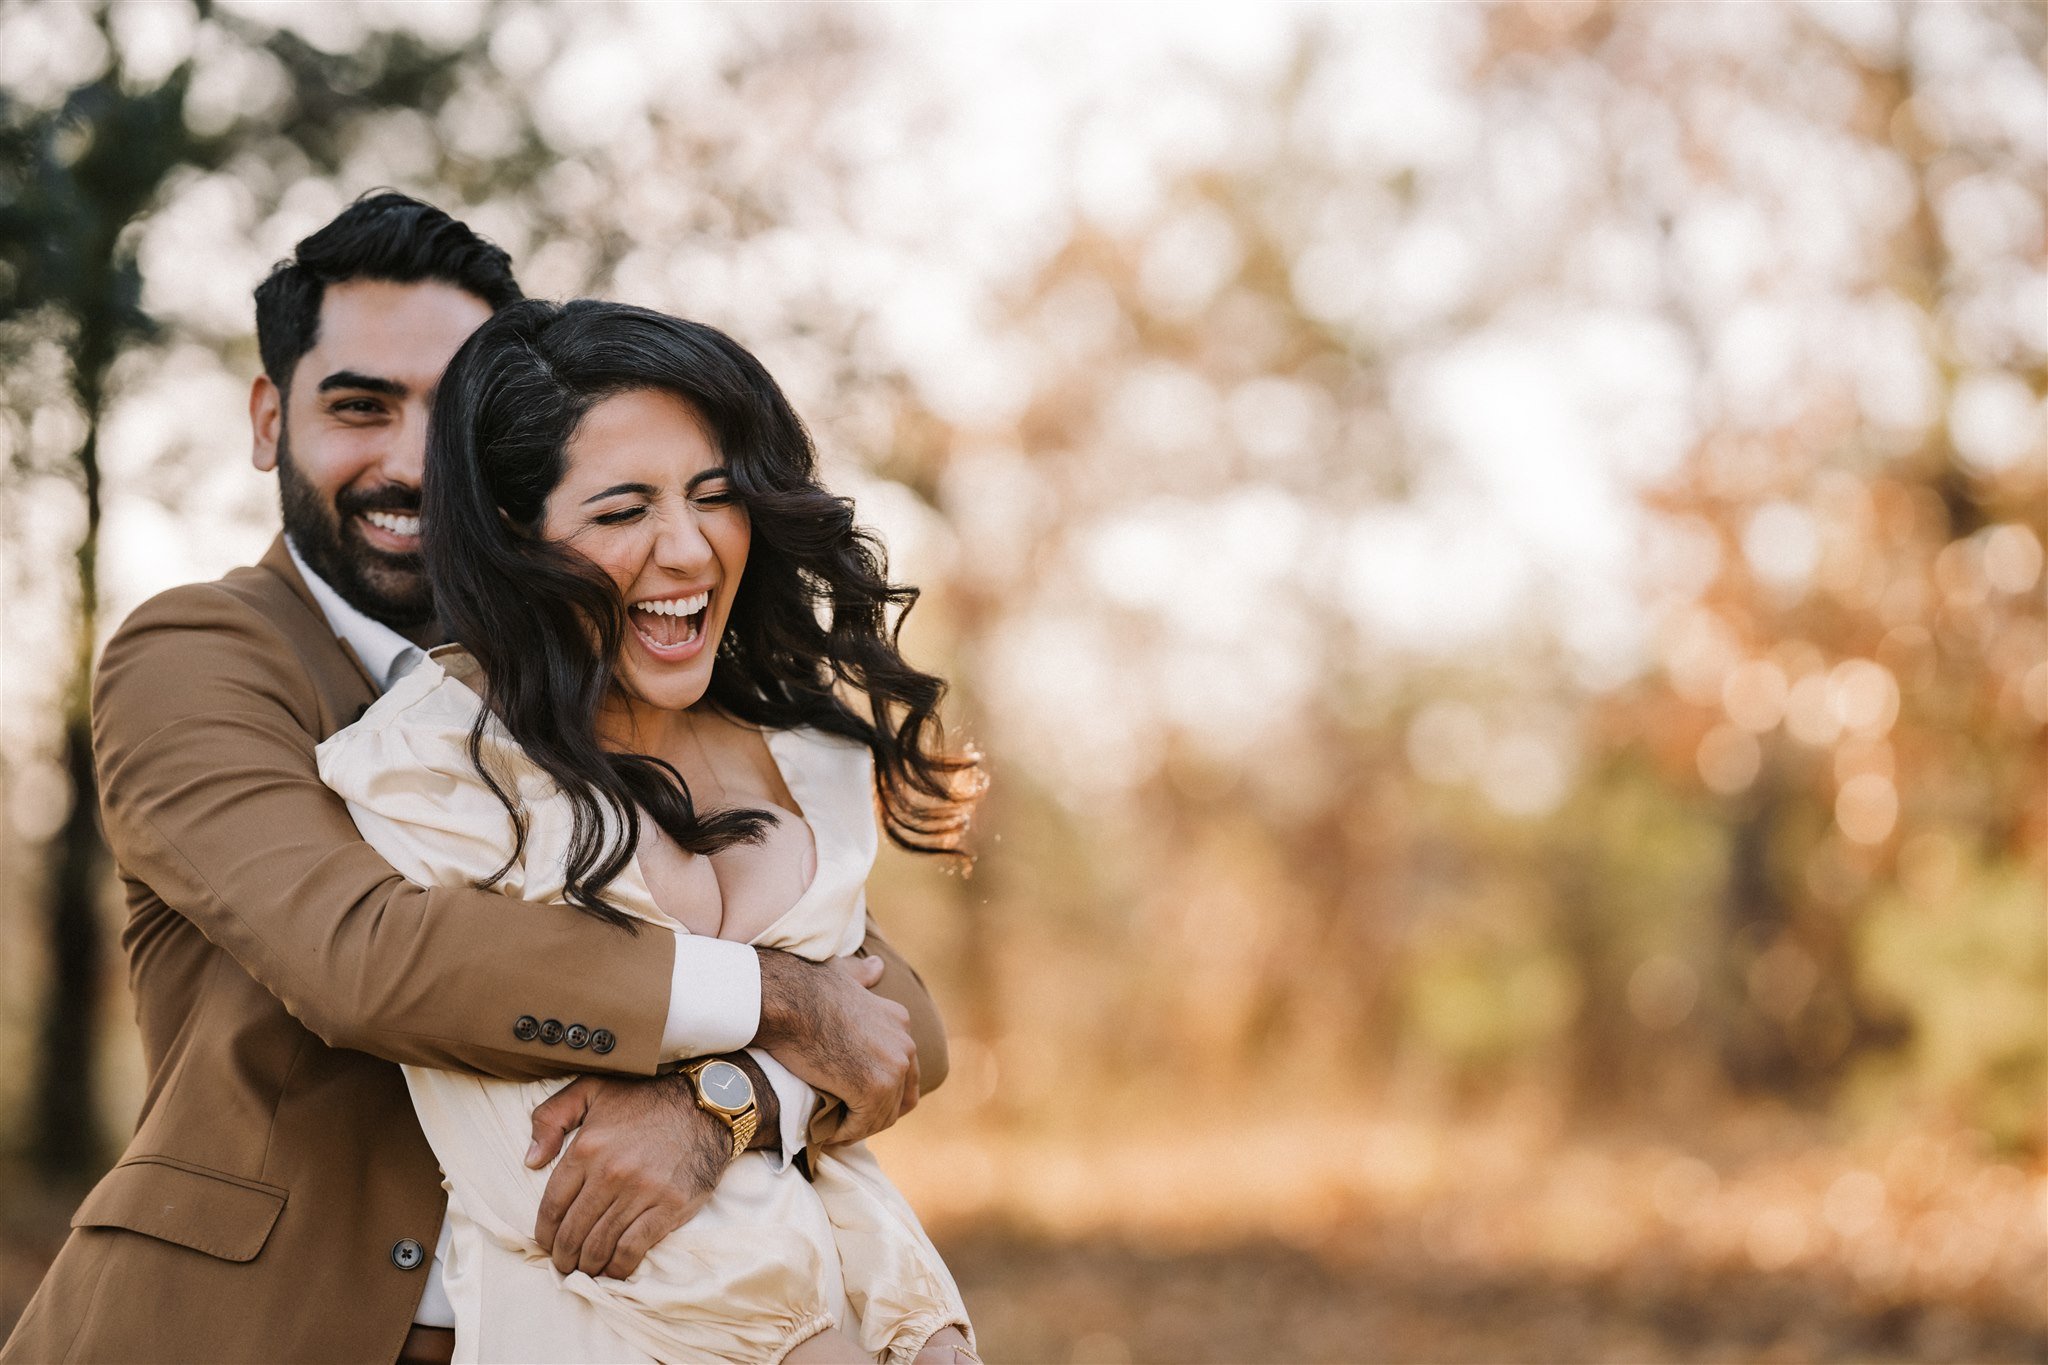 Haley Farm Engagement Sessions | Best CT Fall Foliage Photos